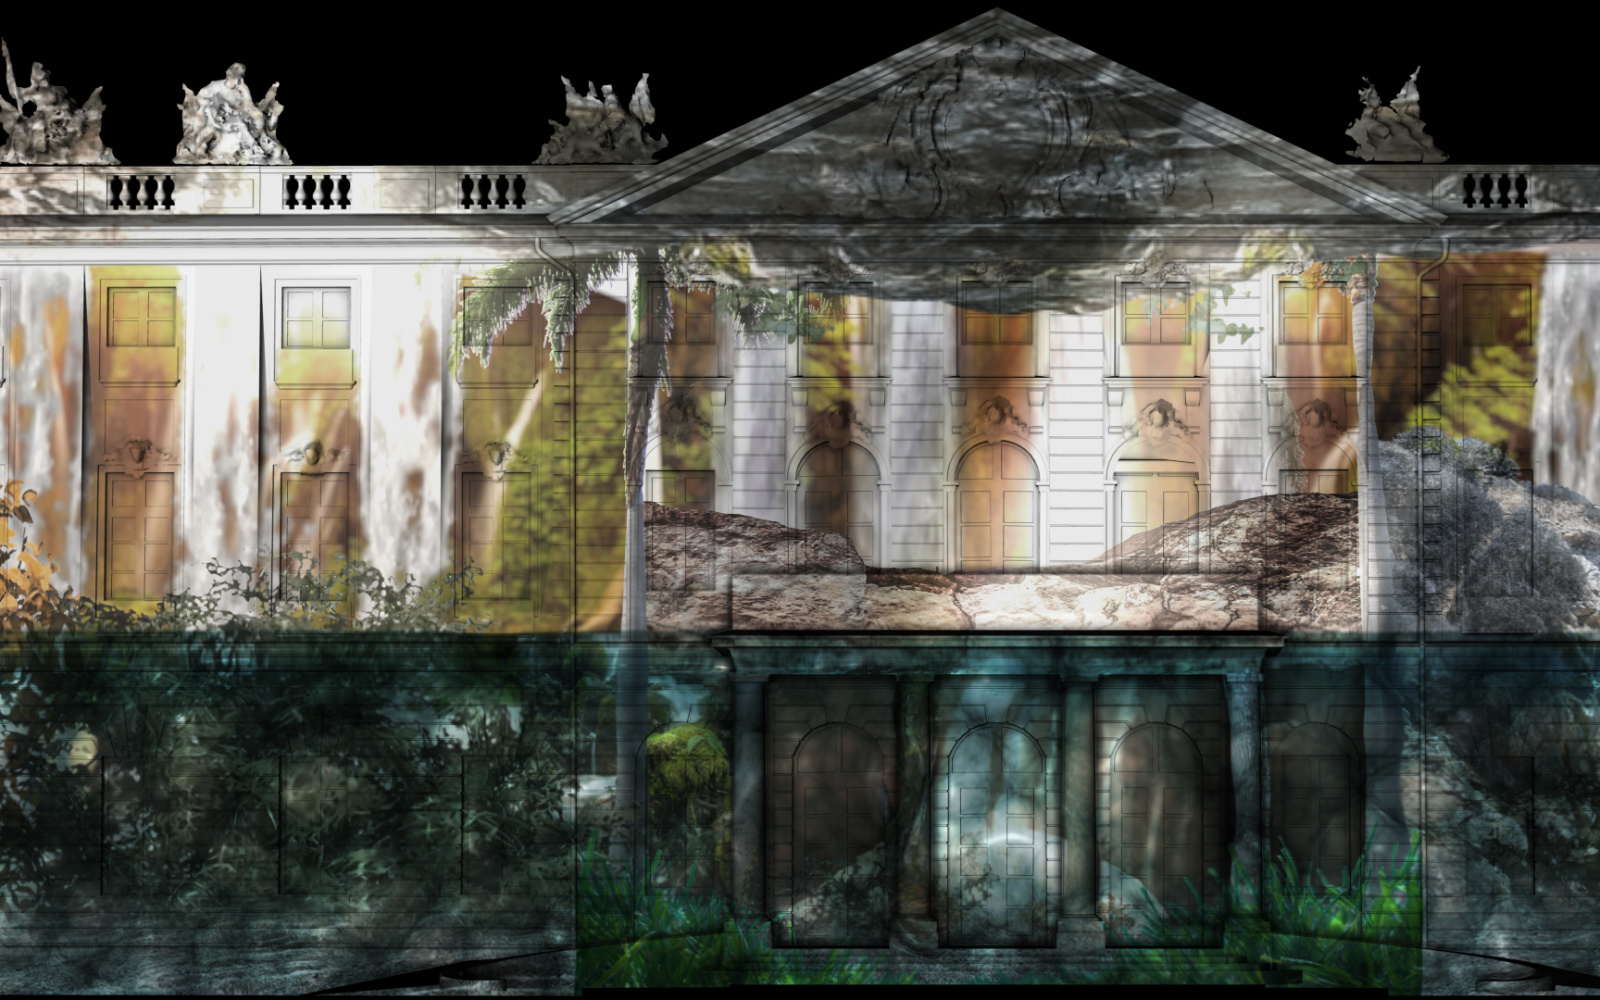 On the facade of the castle in Karlsruhe you can see a projection mapping that glows at night.The mapping shows waterfalls along the castle facade and green elements that remind of nature.